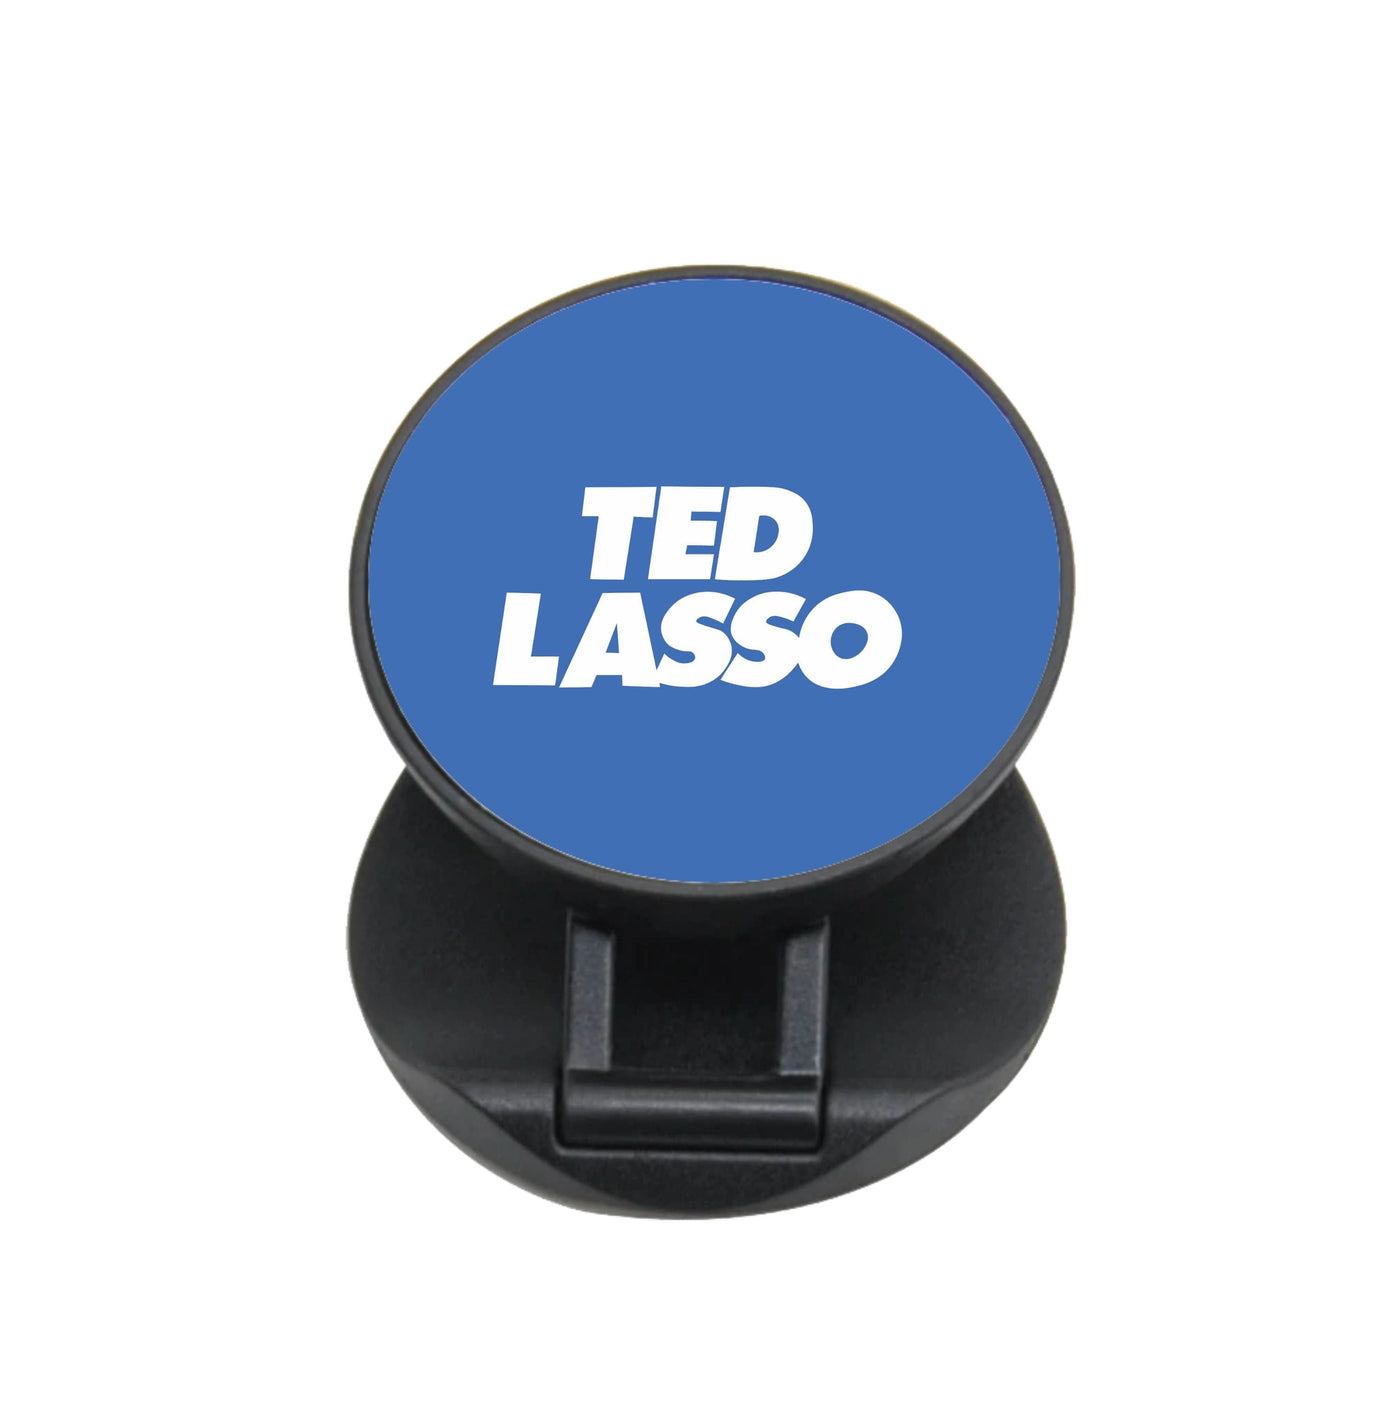 Ted - Ted Lasso FunGrip